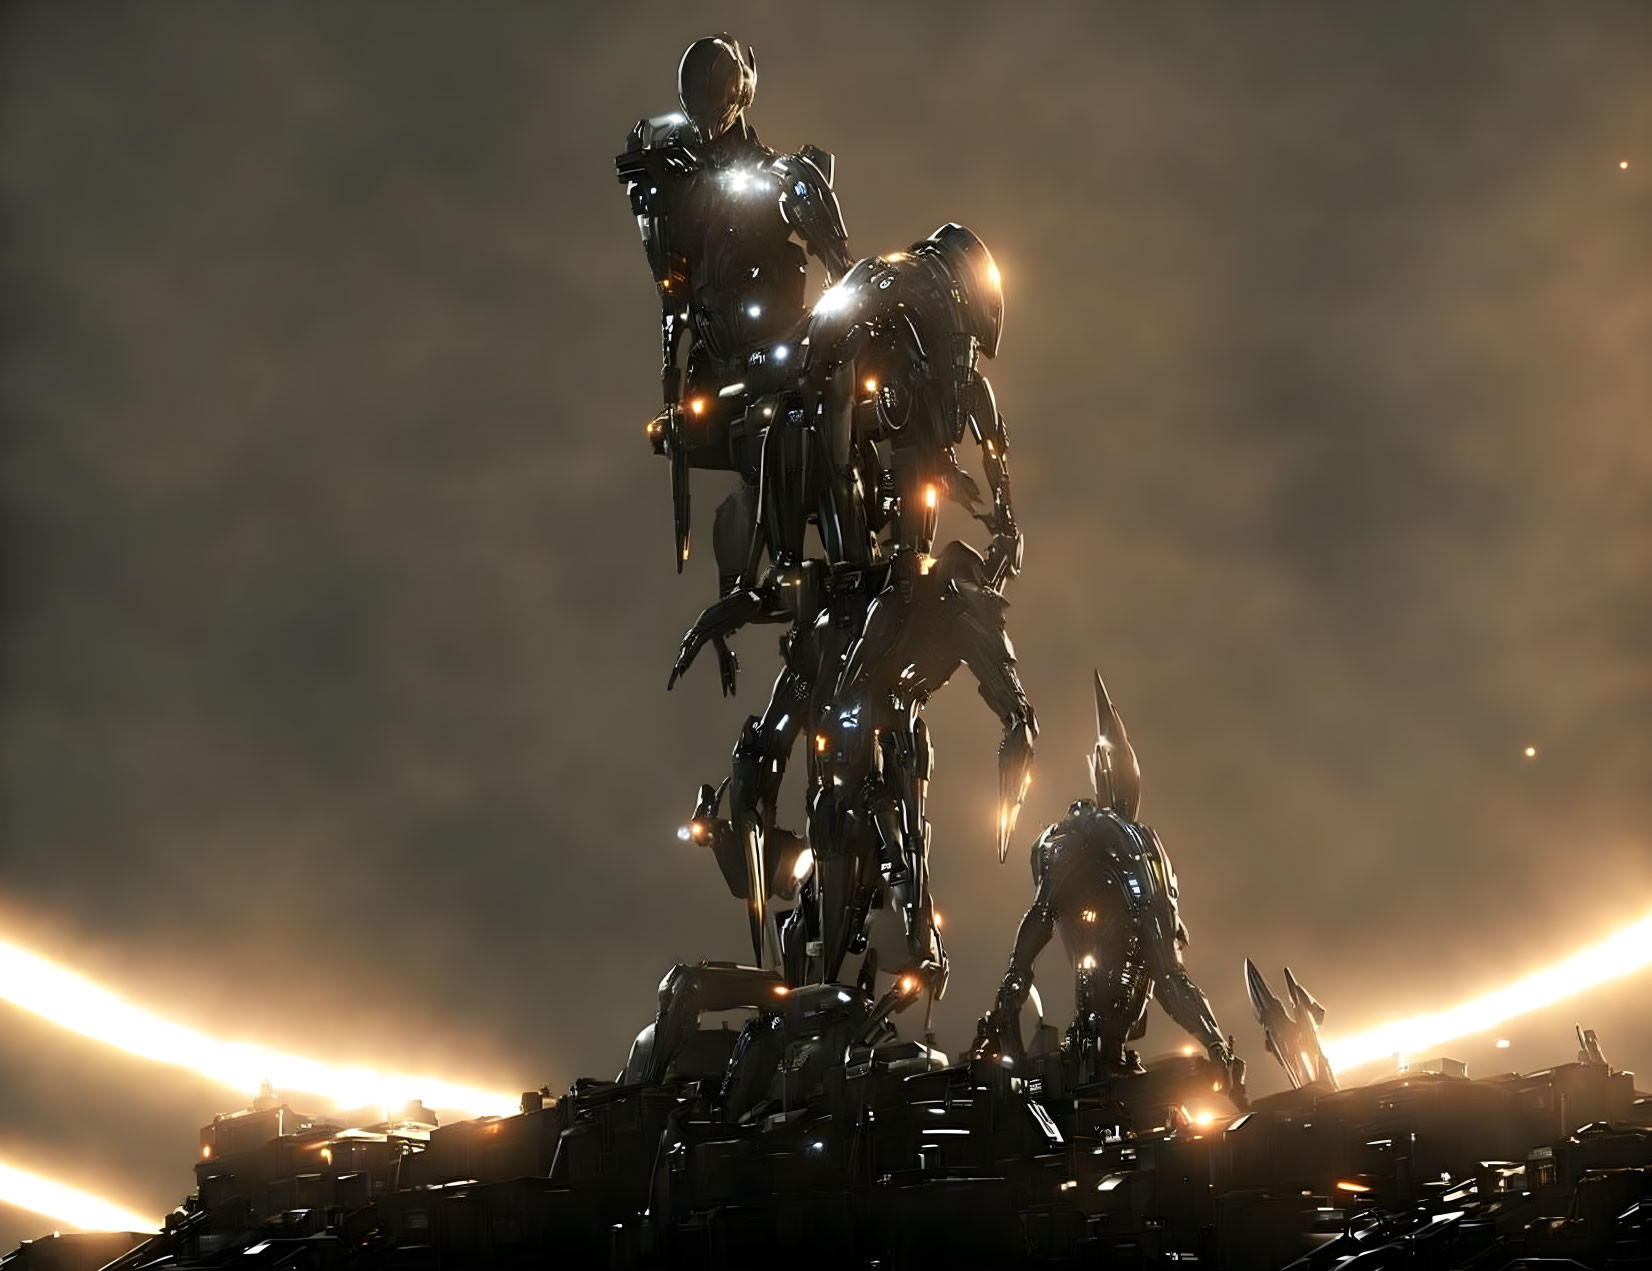 Futuristic robotic figures in debris under dramatic sky with glowing lights